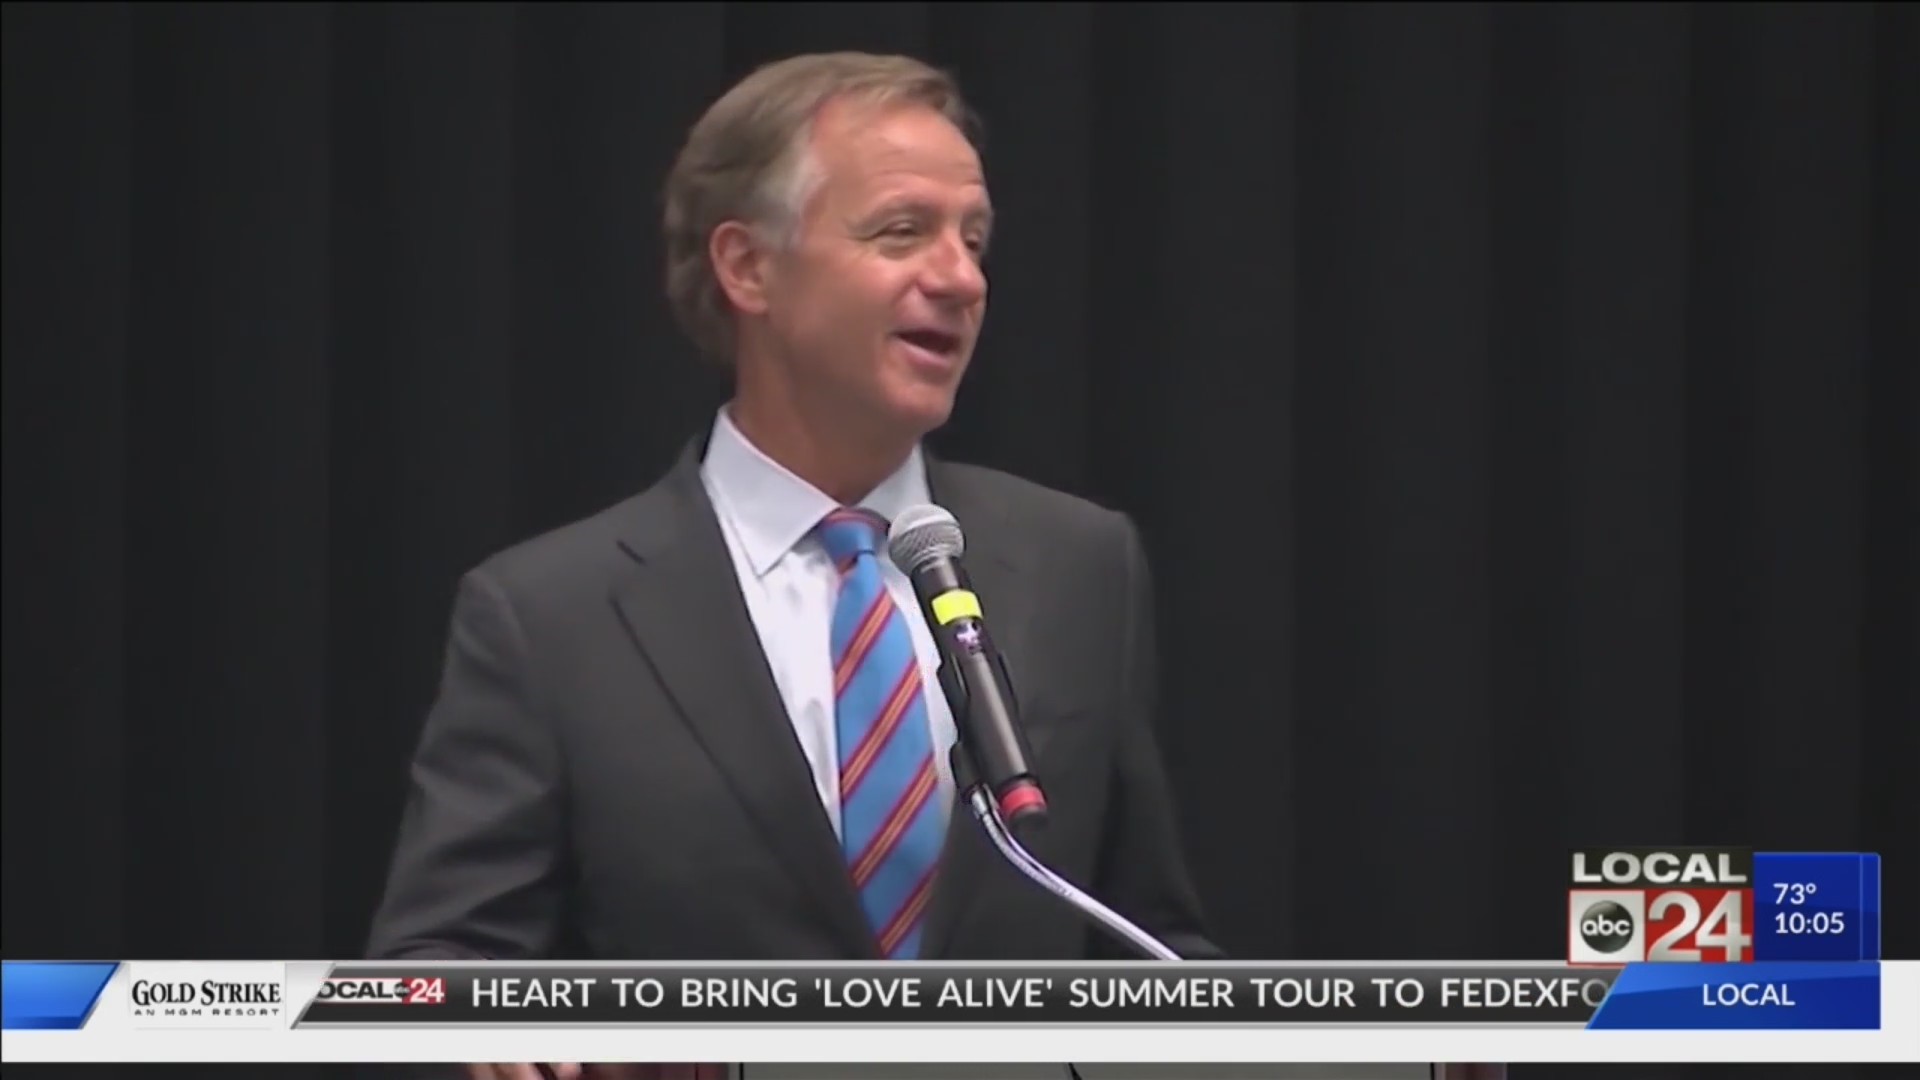 Former Tennessee Gov. Bill Haslam soon will decide if he’s running for U.S. Senate